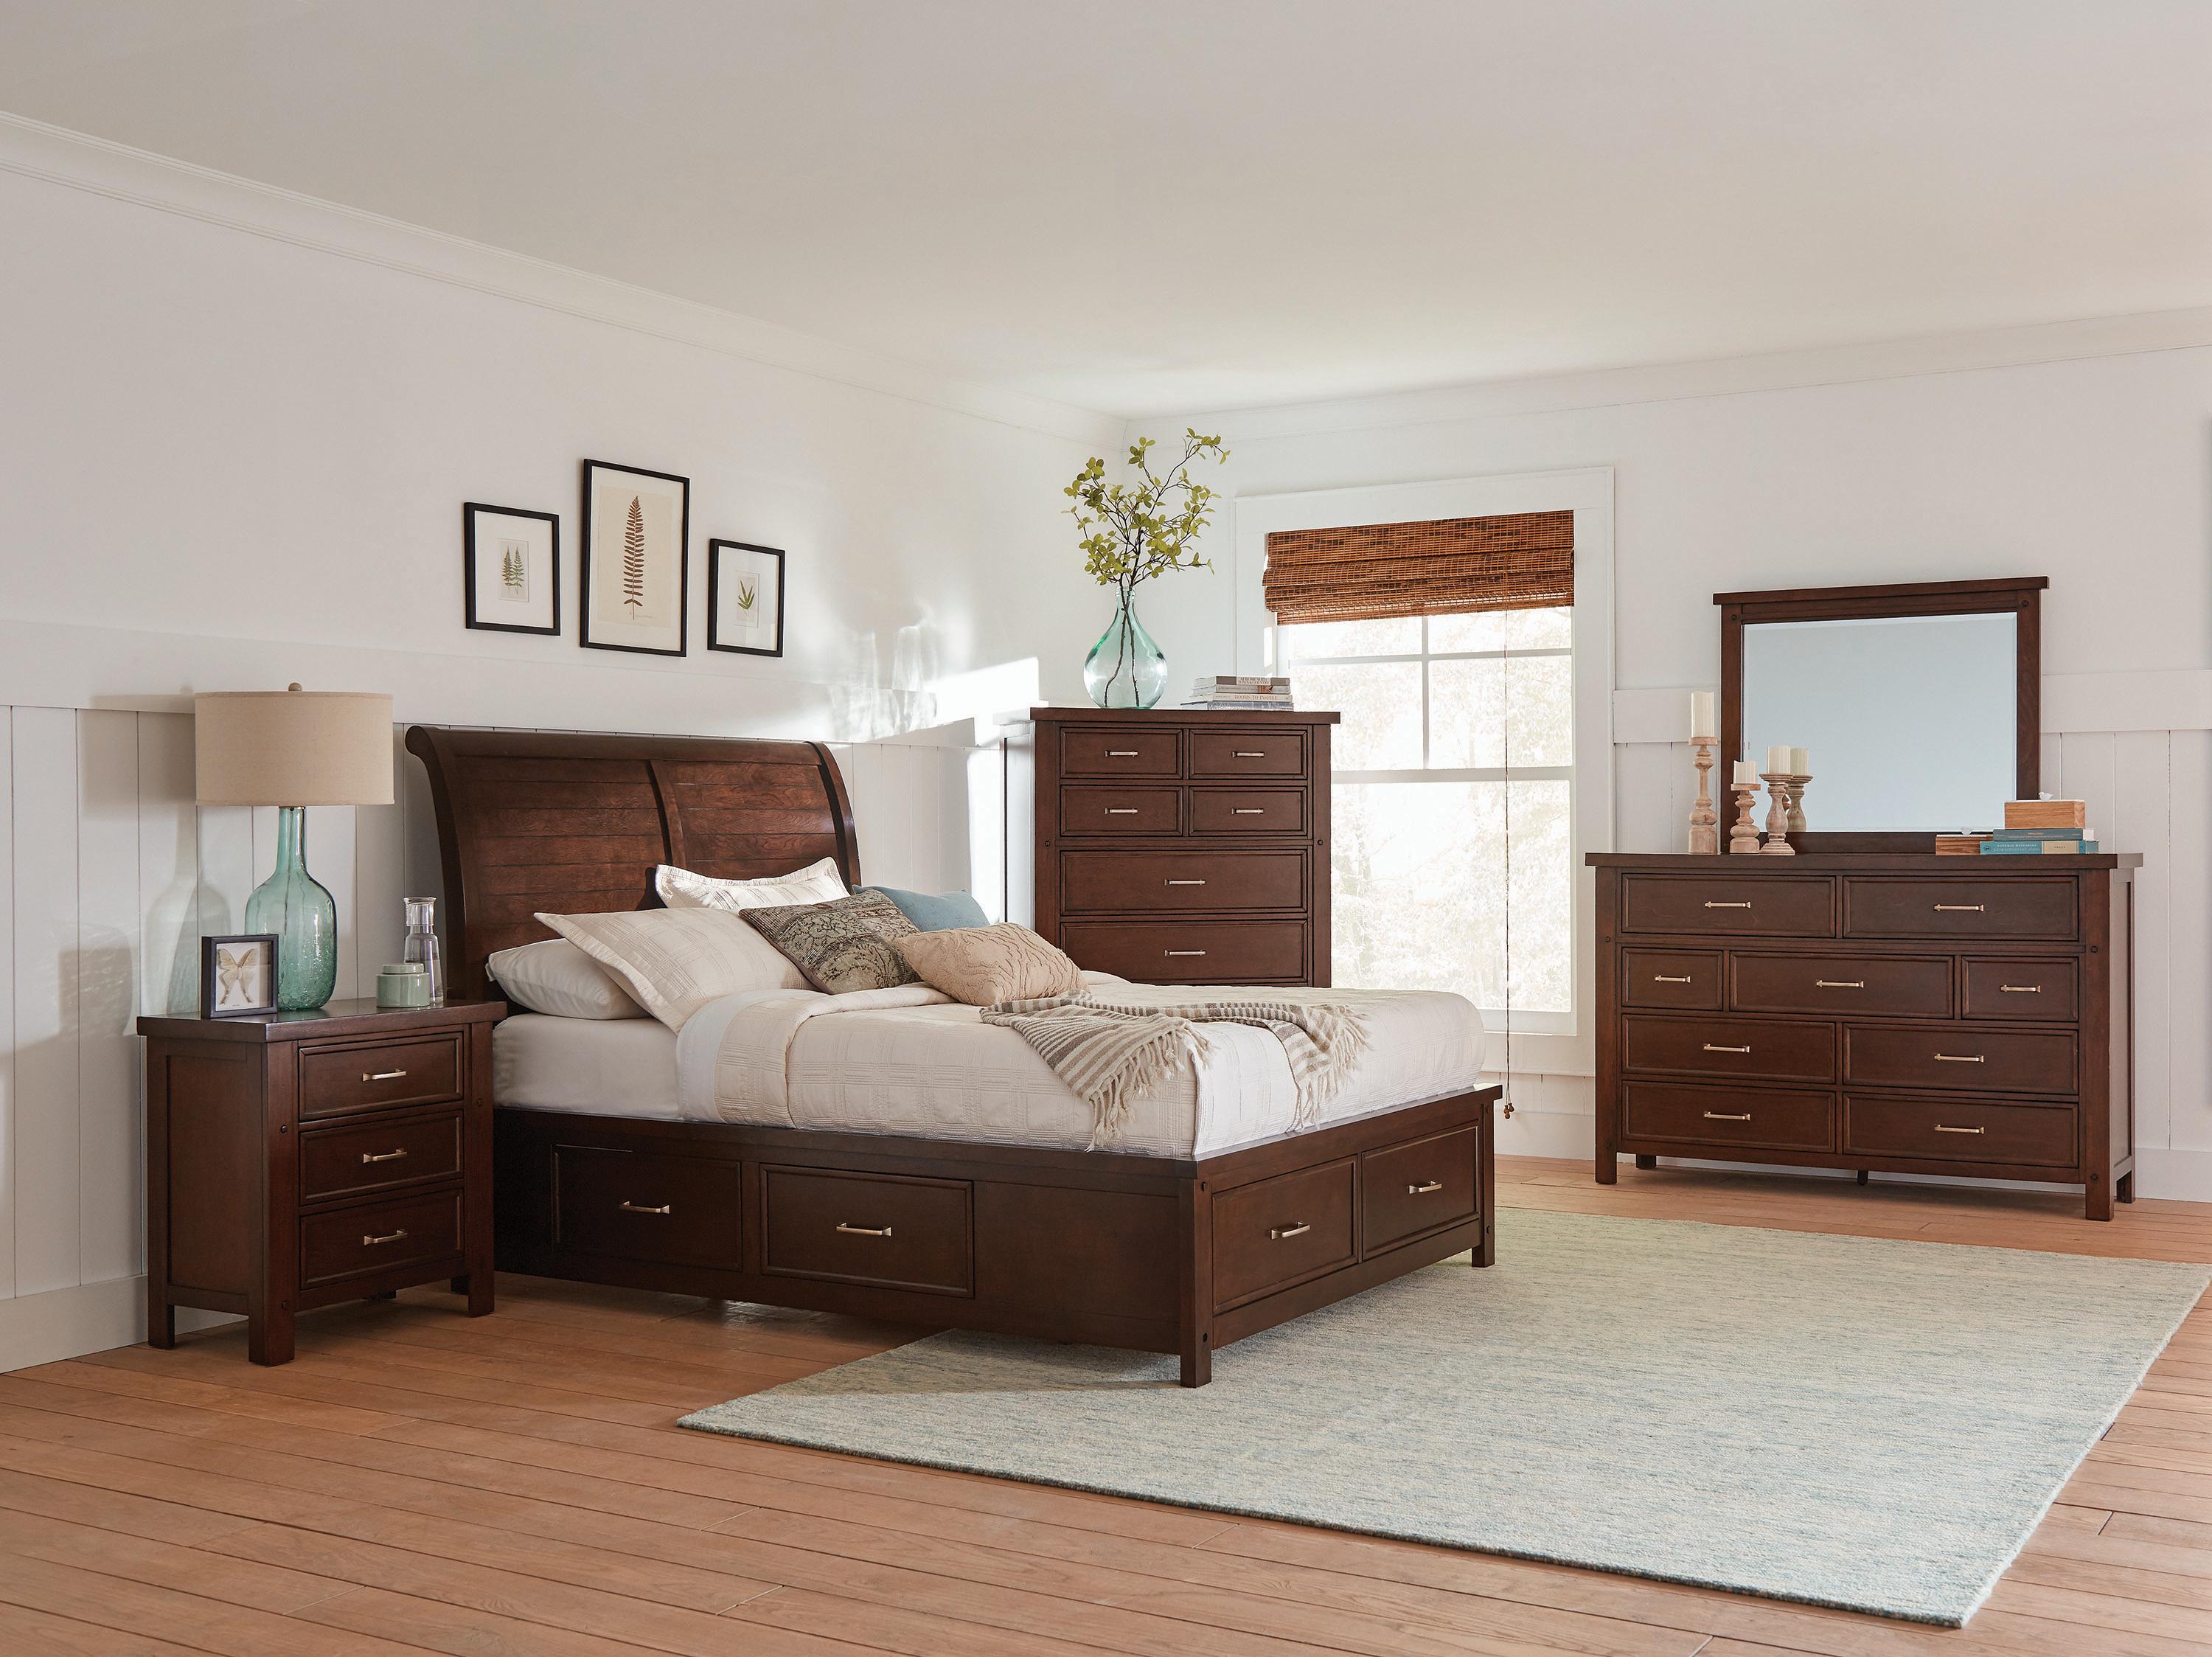 Transitional Bedroom Set 206430Q-5PC Barstow 206430Q-5PC in Dark Cherry 